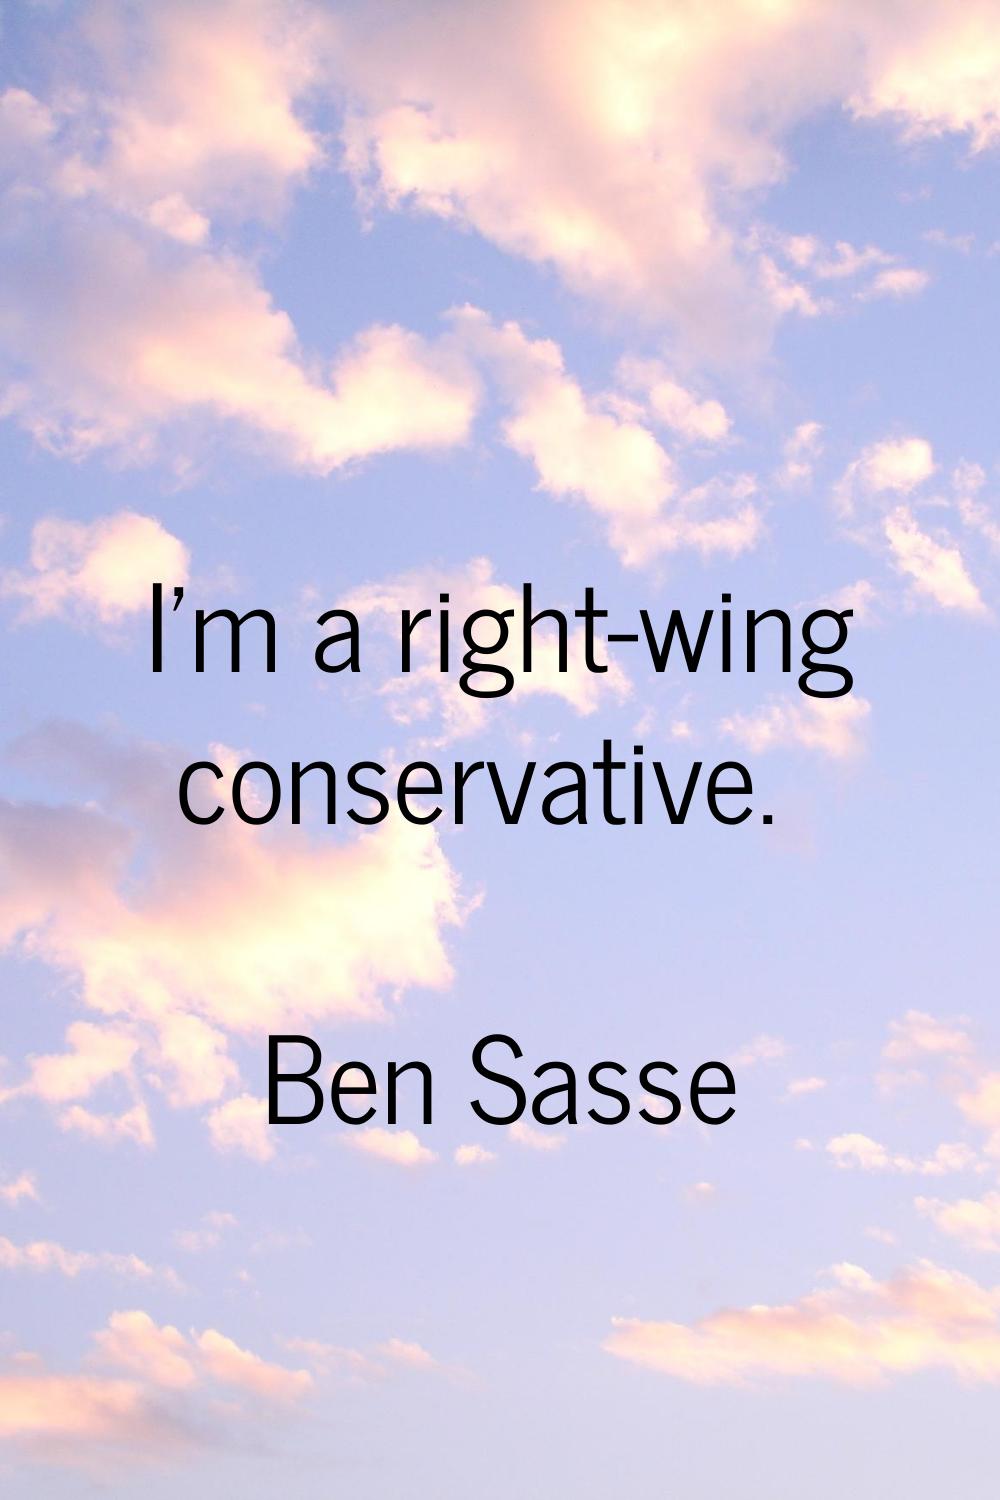 I'm a right-wing conservative.